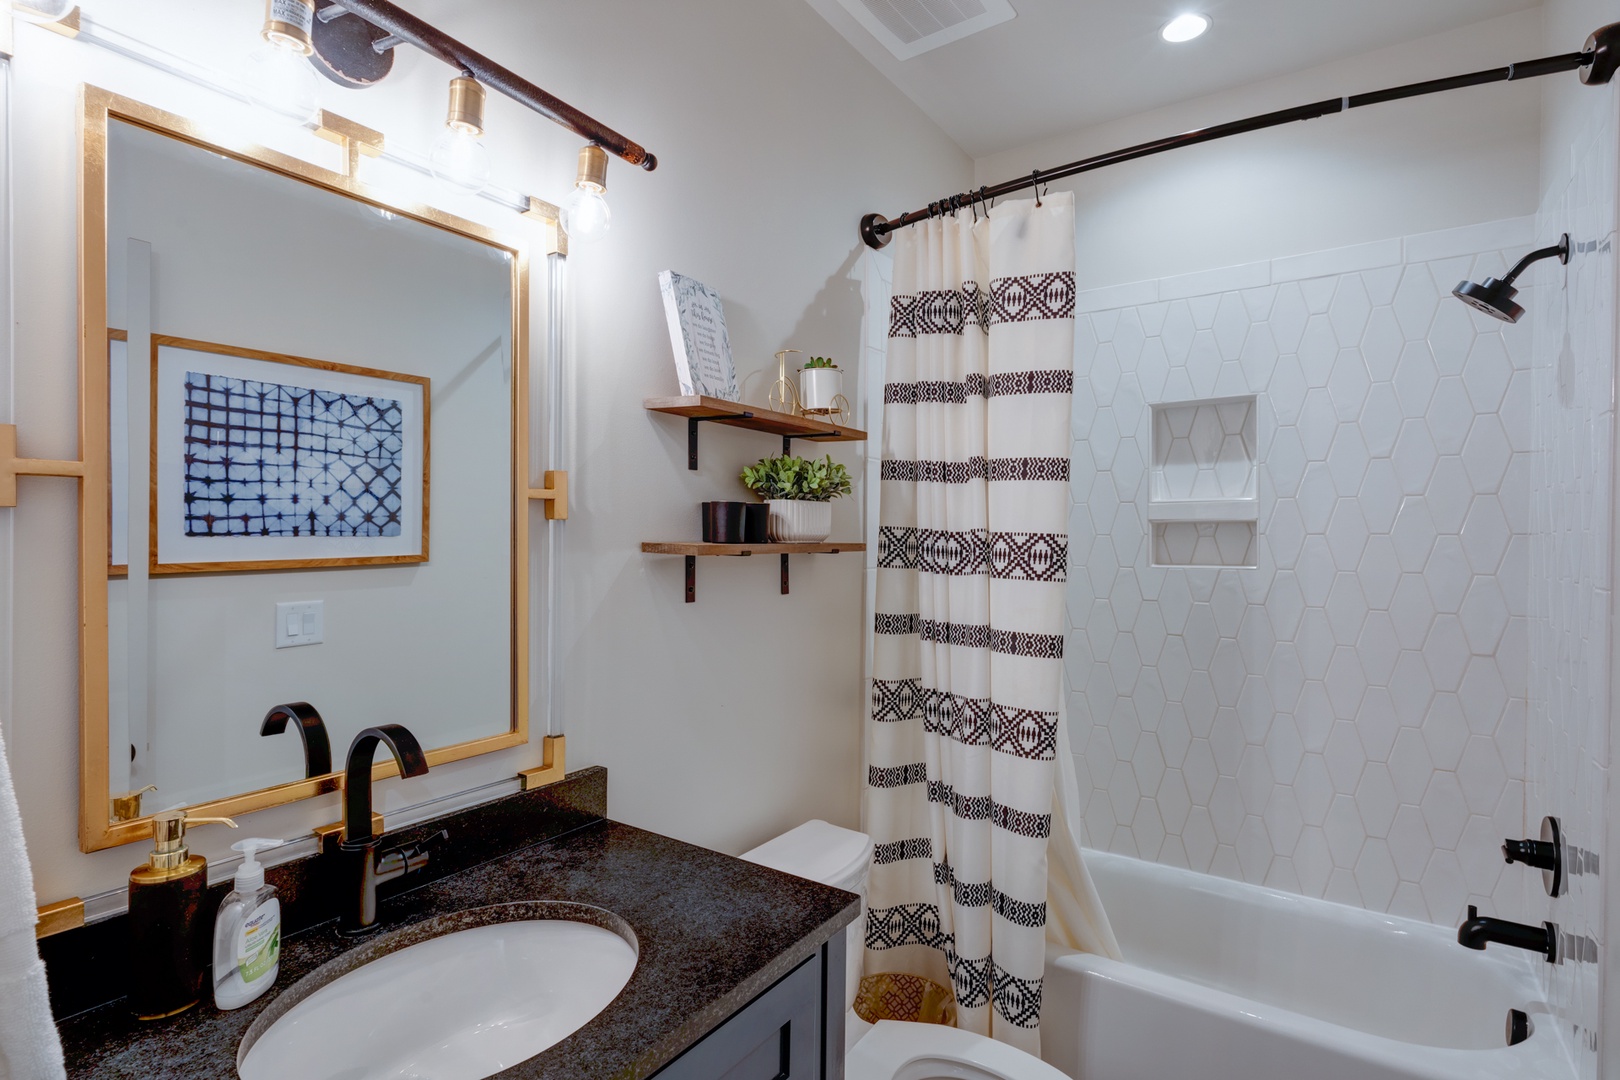 The full bathroom offers a stylish shower/tub combo